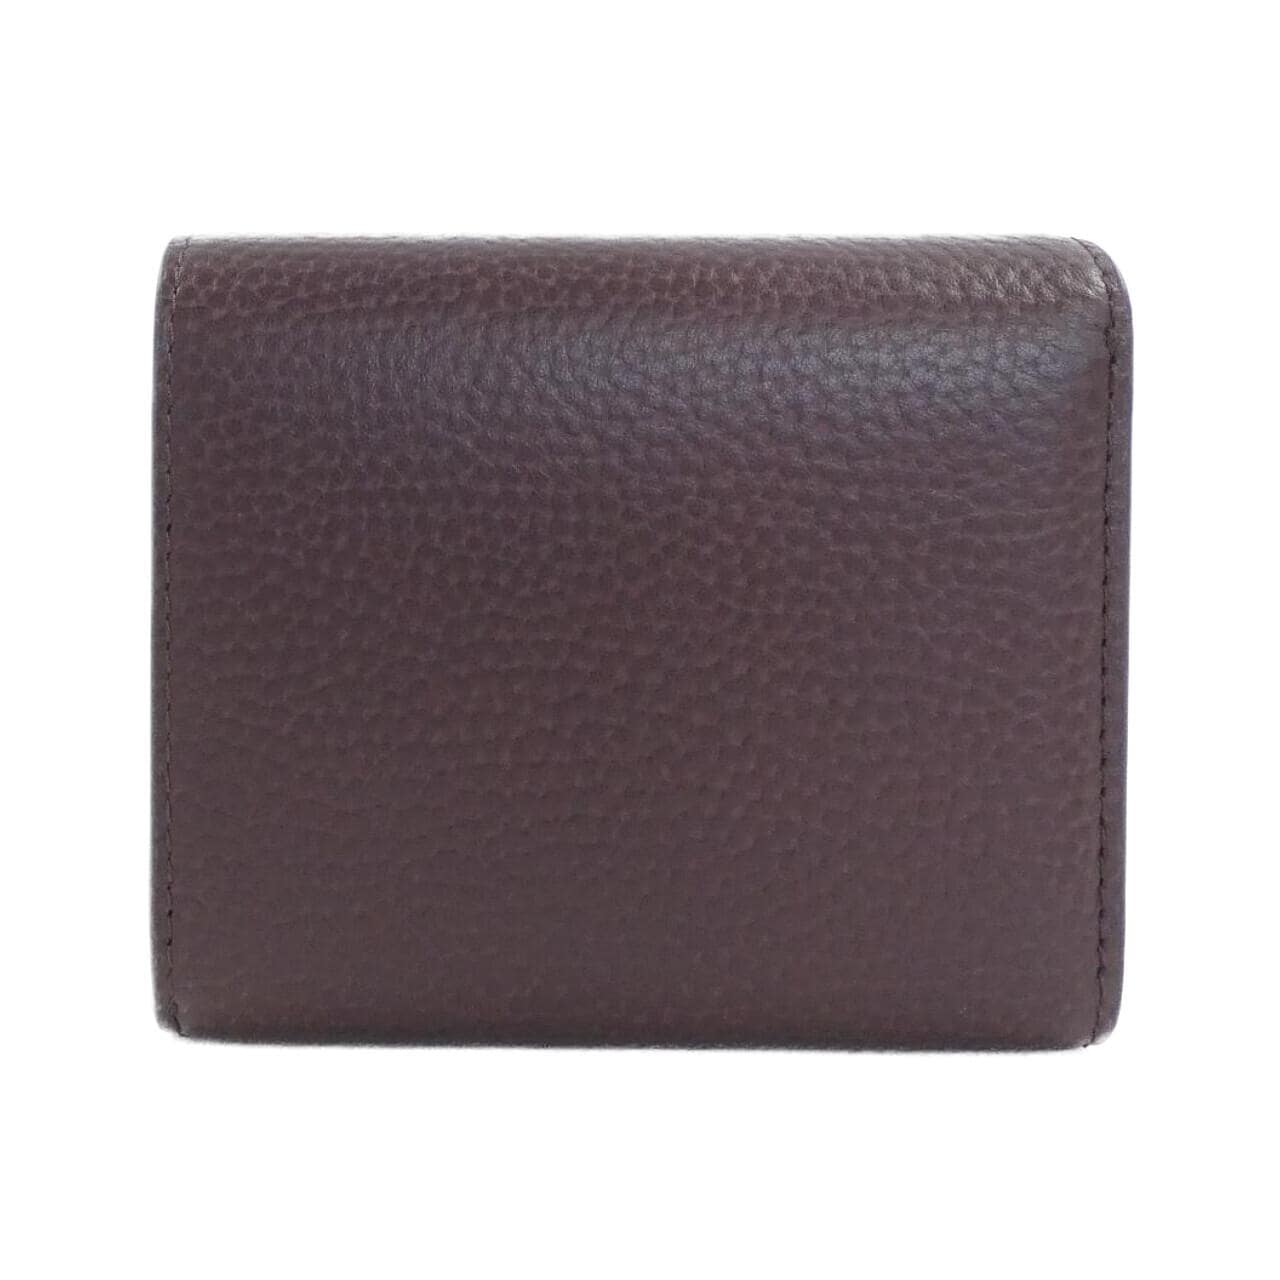 [BRAND NEW] Mulberry RL5074 346 Wallet